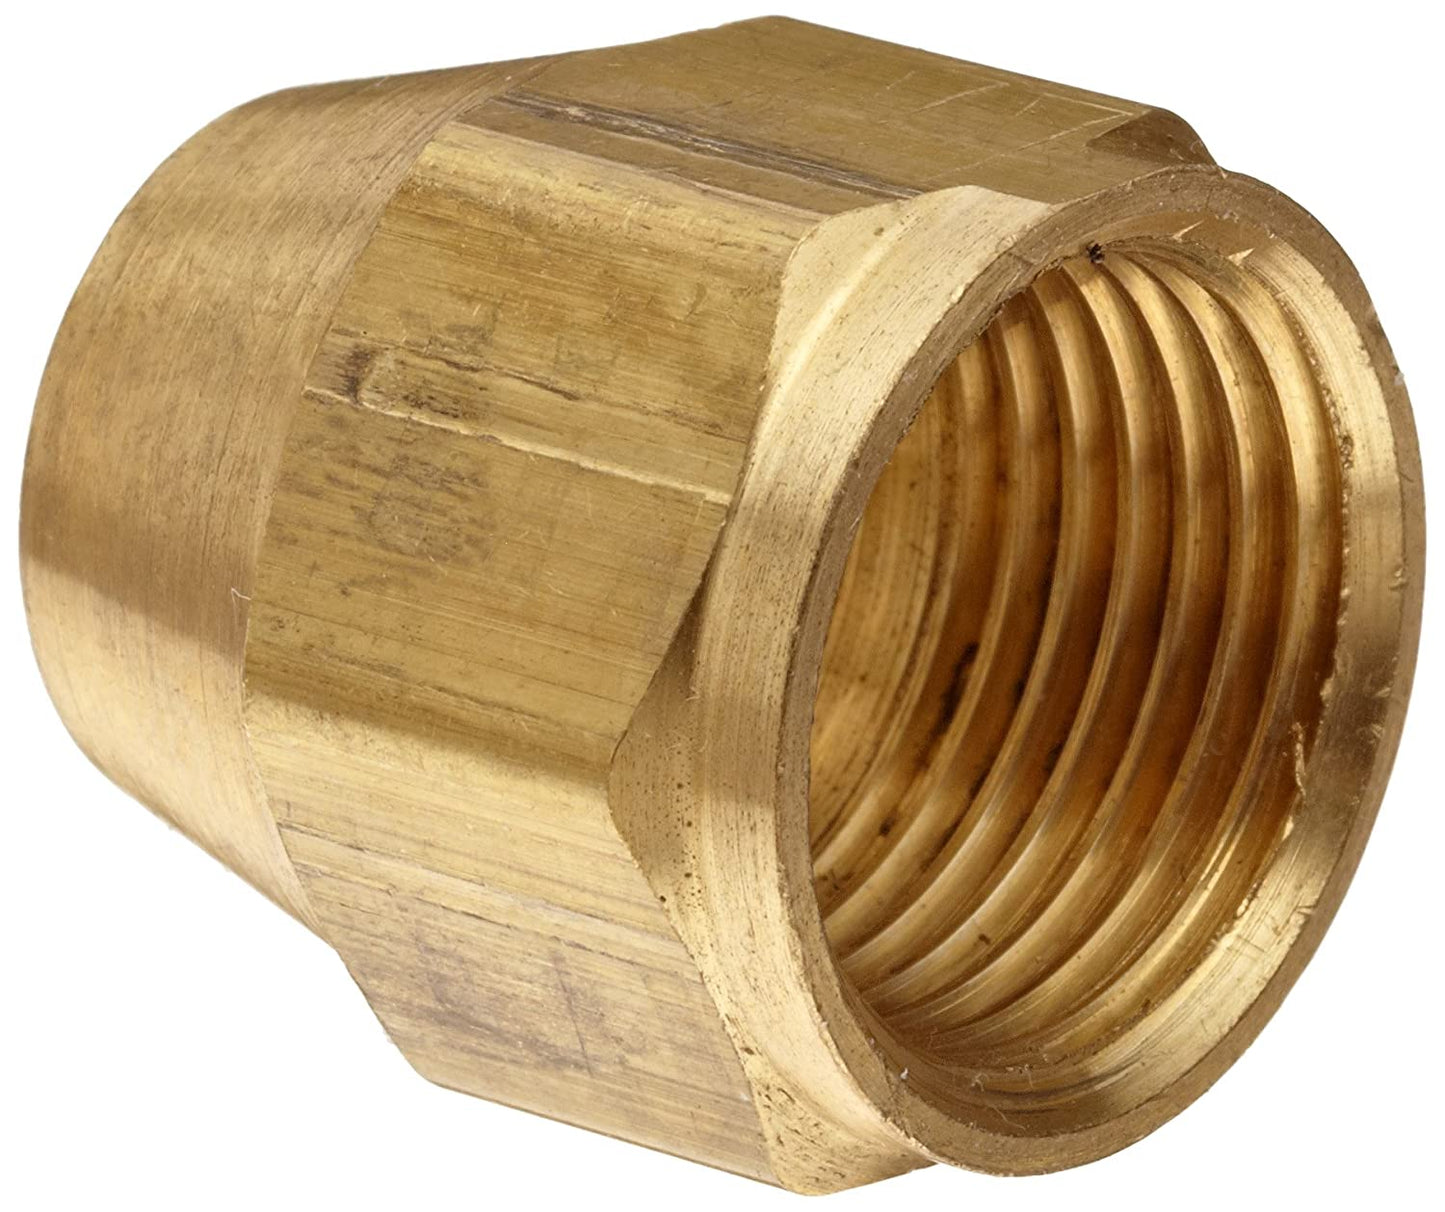 Anderson Metals 54014-06 Brass Tube Fitting, Short Flare Nut, 3/8" Tube OD - (For 12 piece(s))